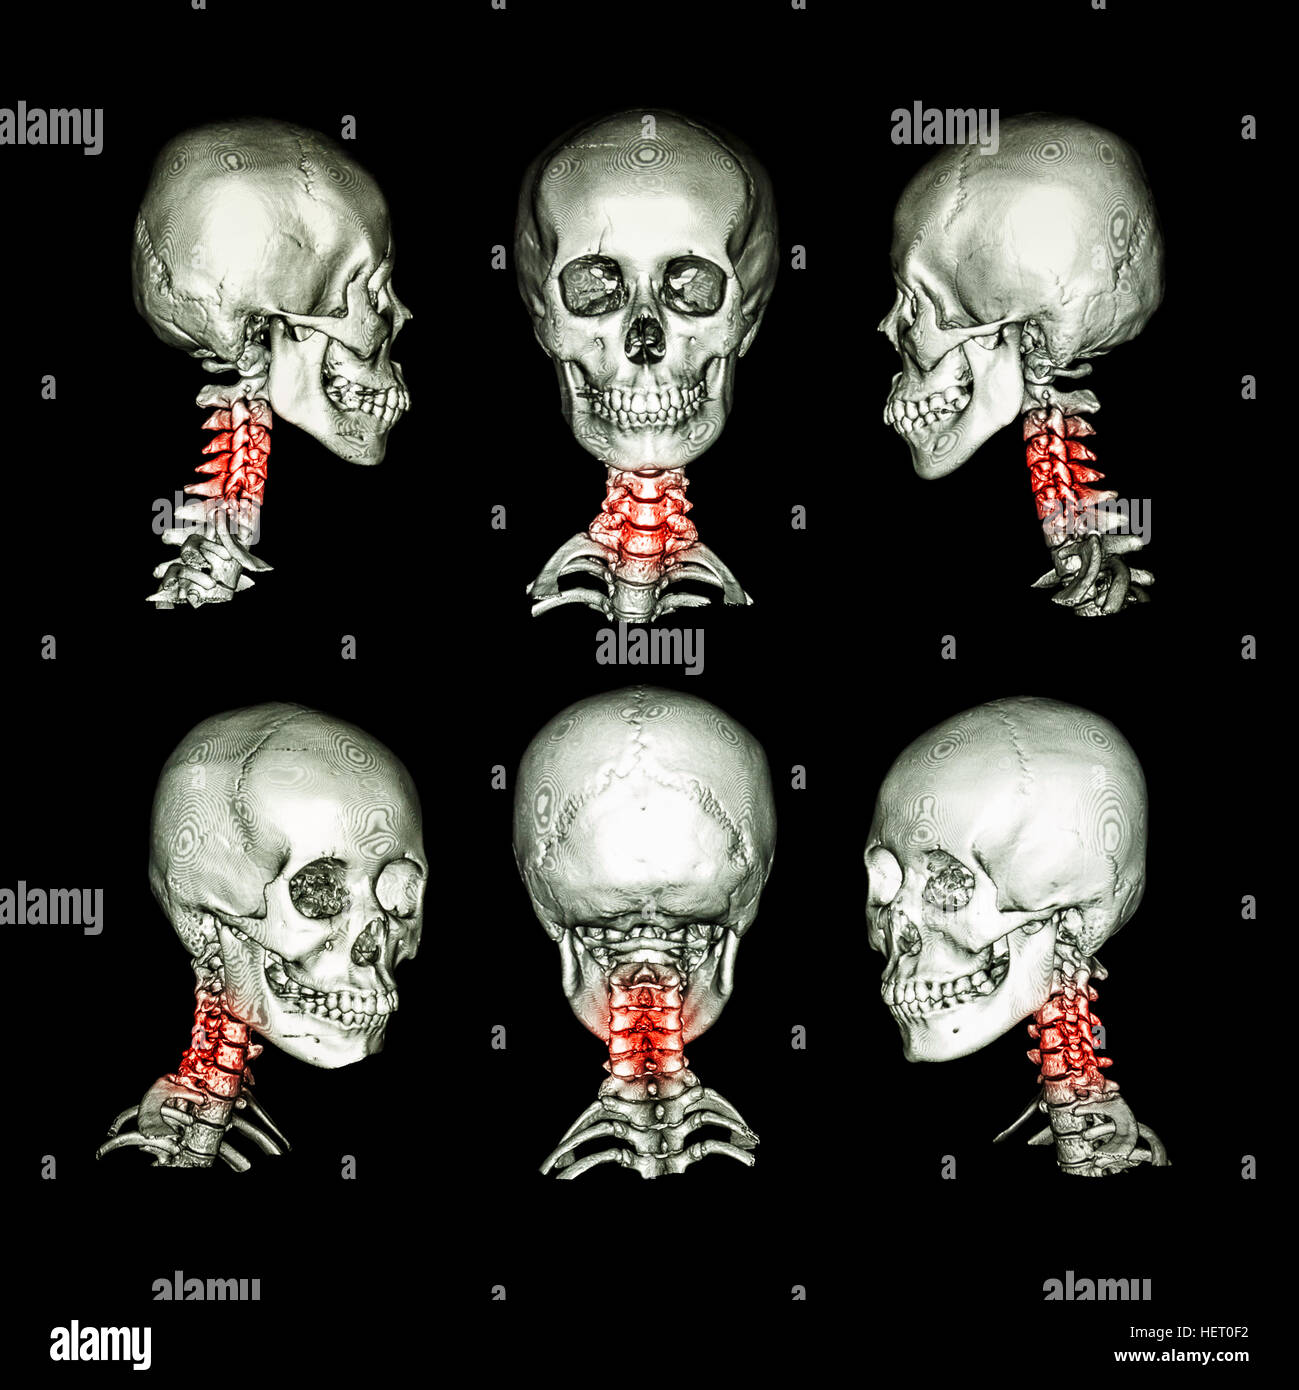 CT scan and 3D image of skull and neck . Use this image for cervical spondylosis , spondylolisthesis , spondylitis , spine trauma condition . Stock Photo